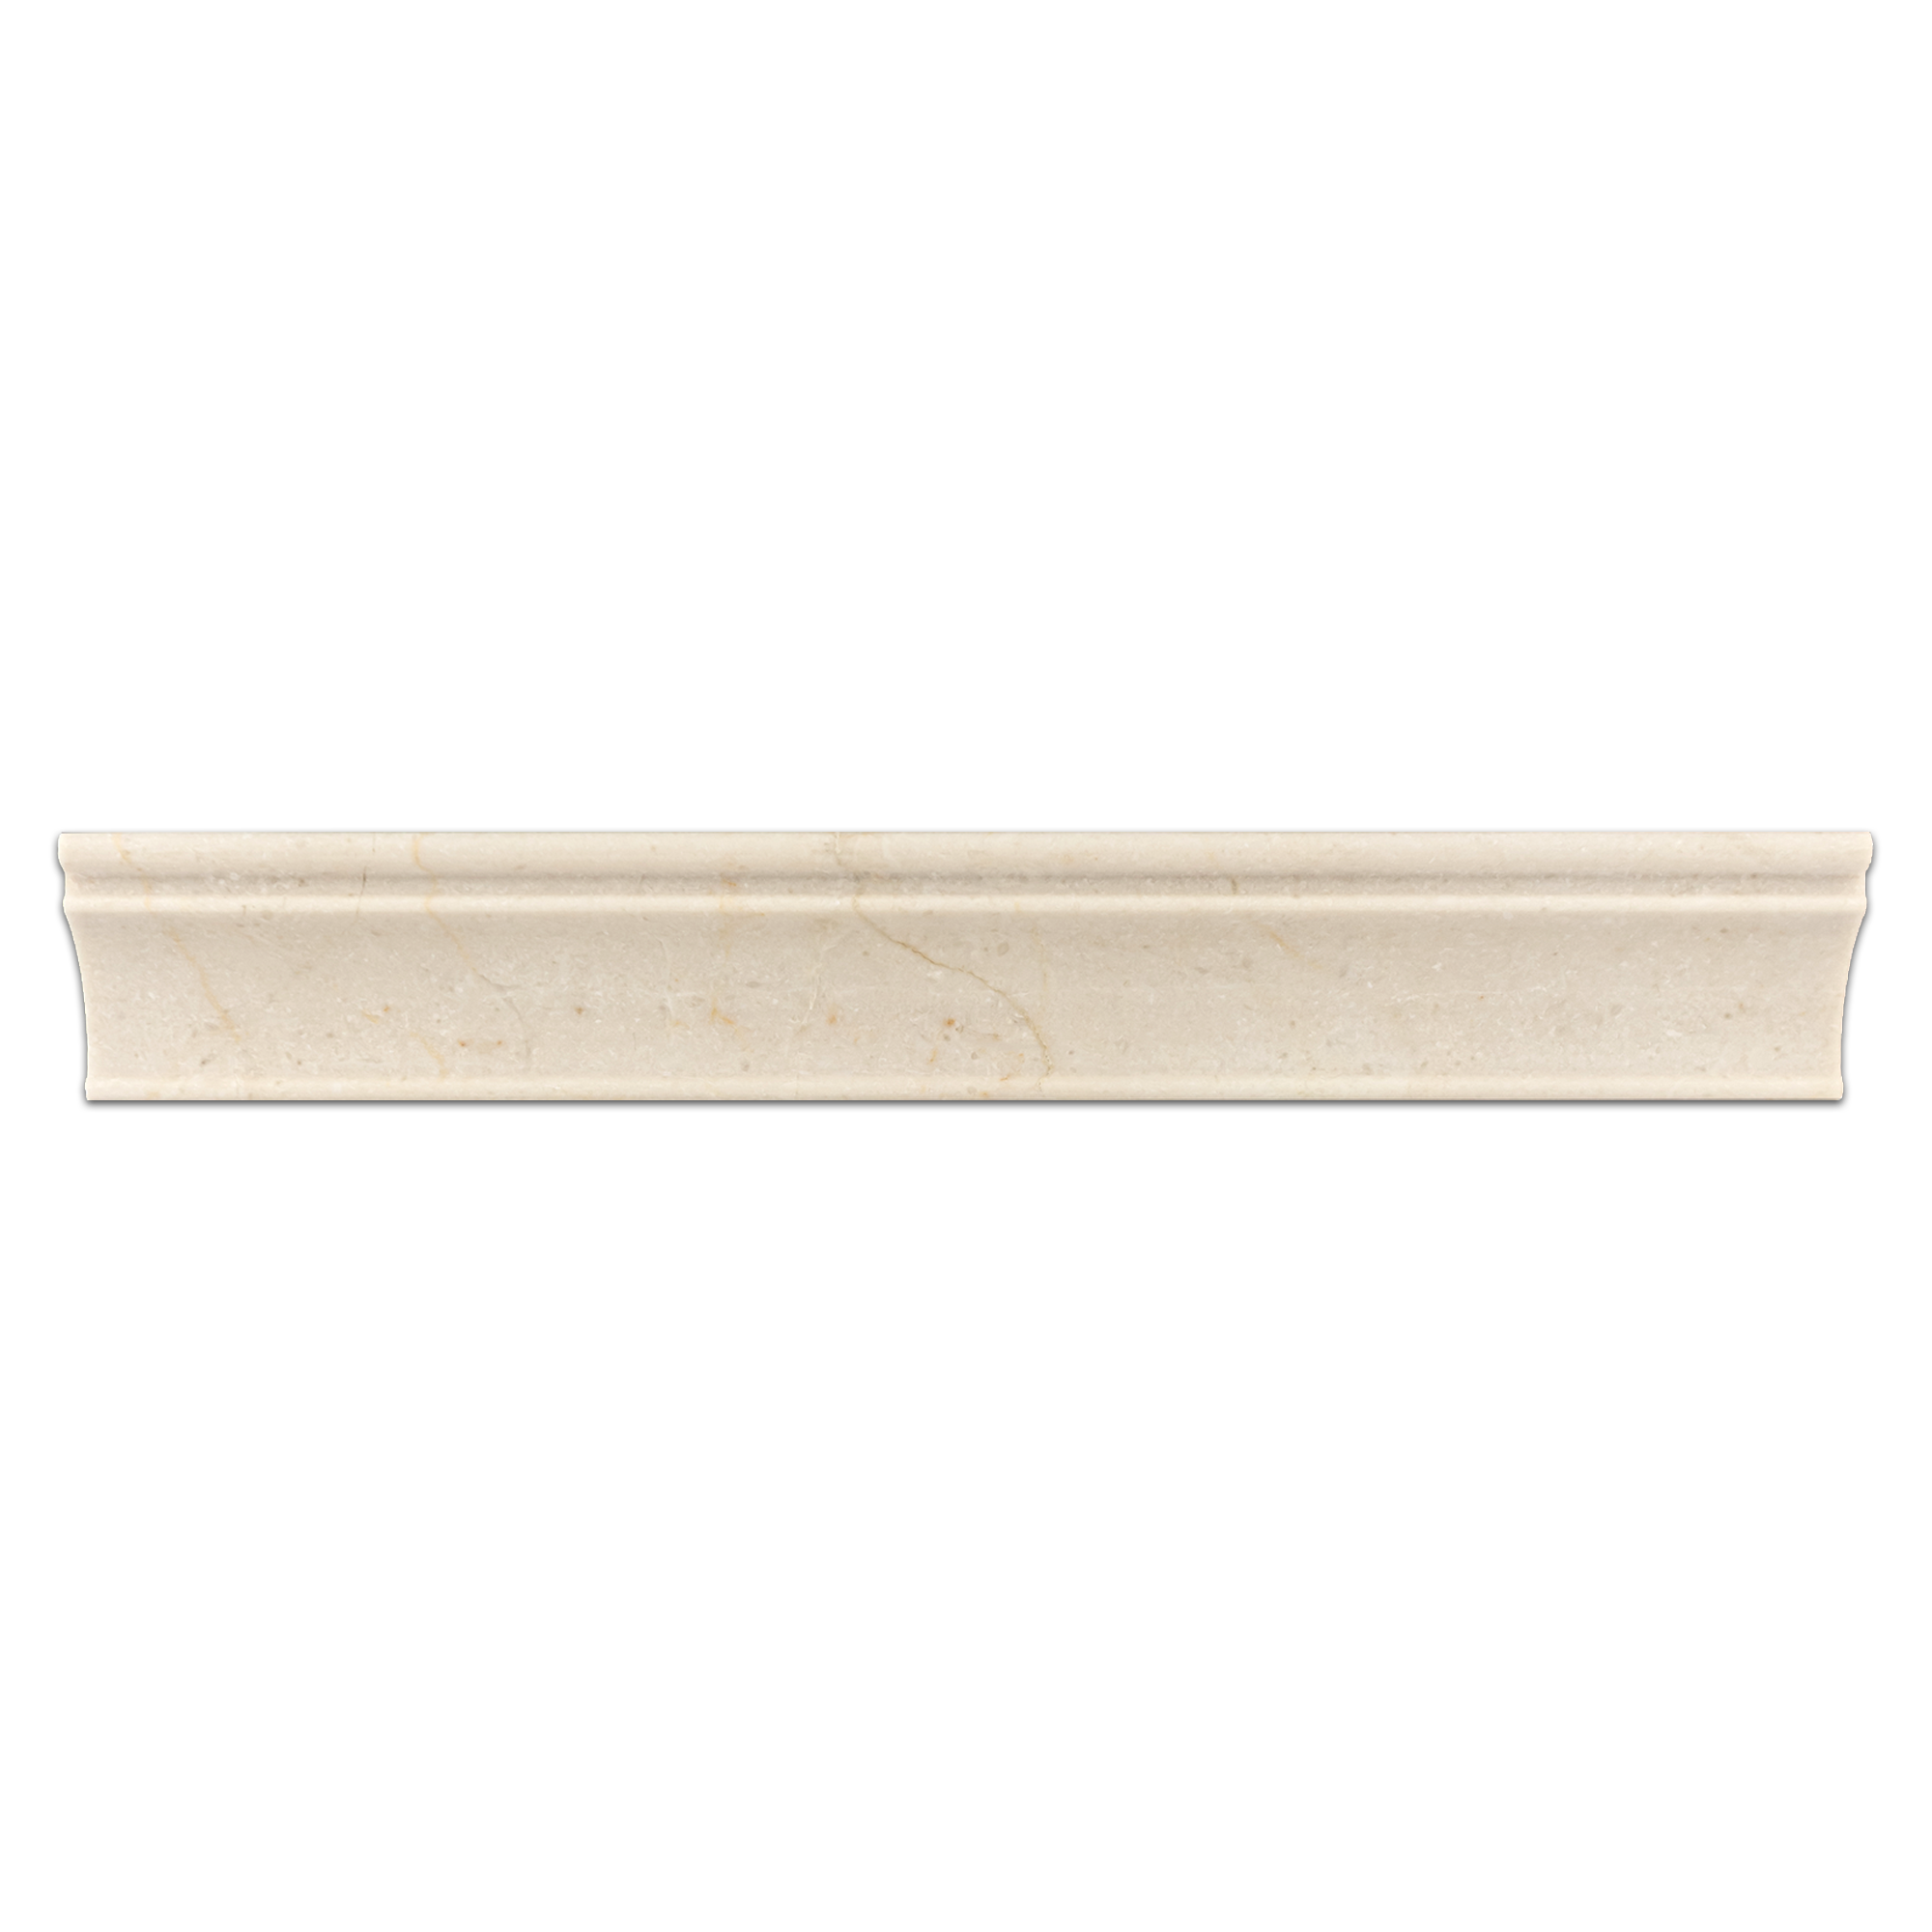 Elon Crema Marfil Marble Crown 2x12 Polished Molding Tile from Surface Group International.